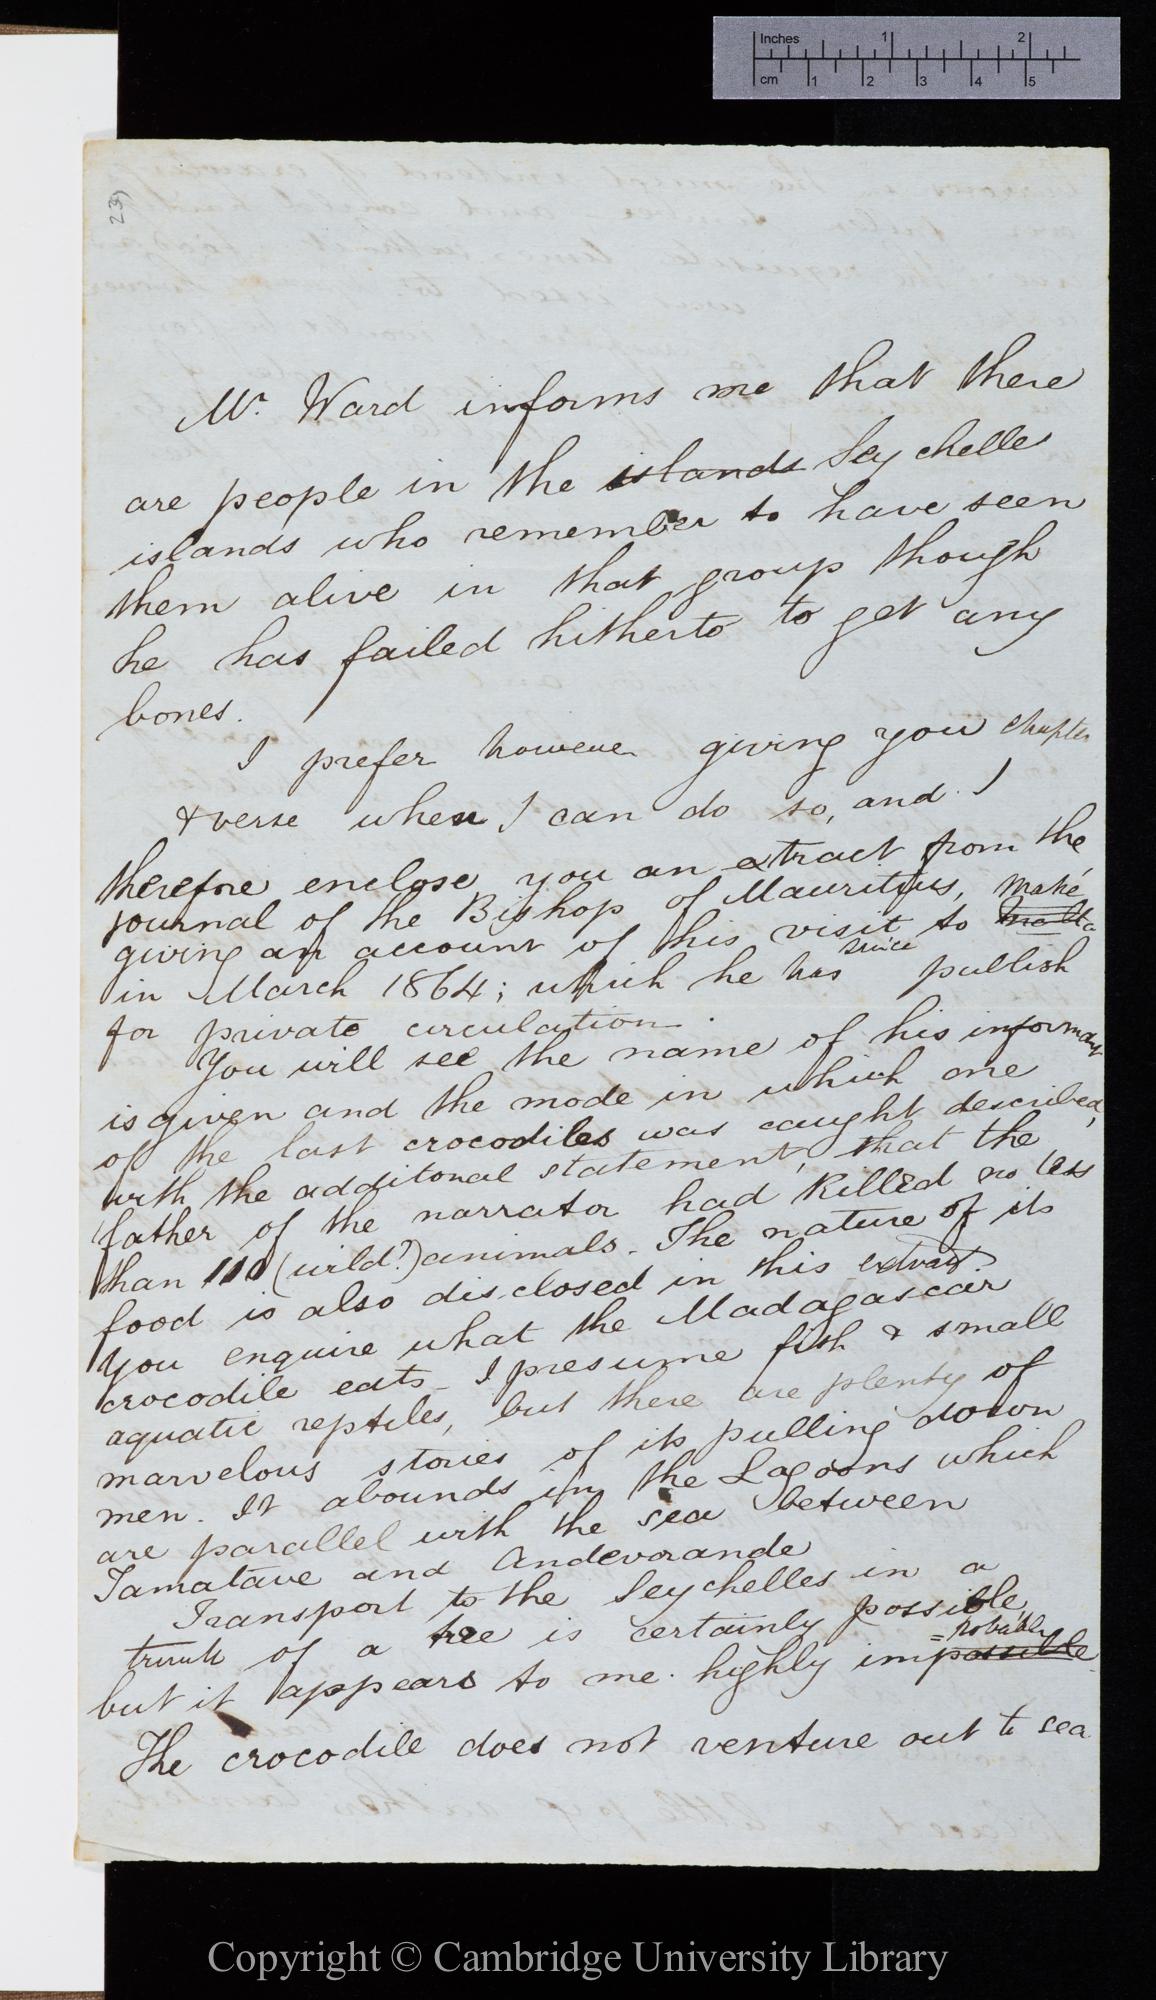 Letter from J. D. Hooker to C. R. Darwin   3 October 1868